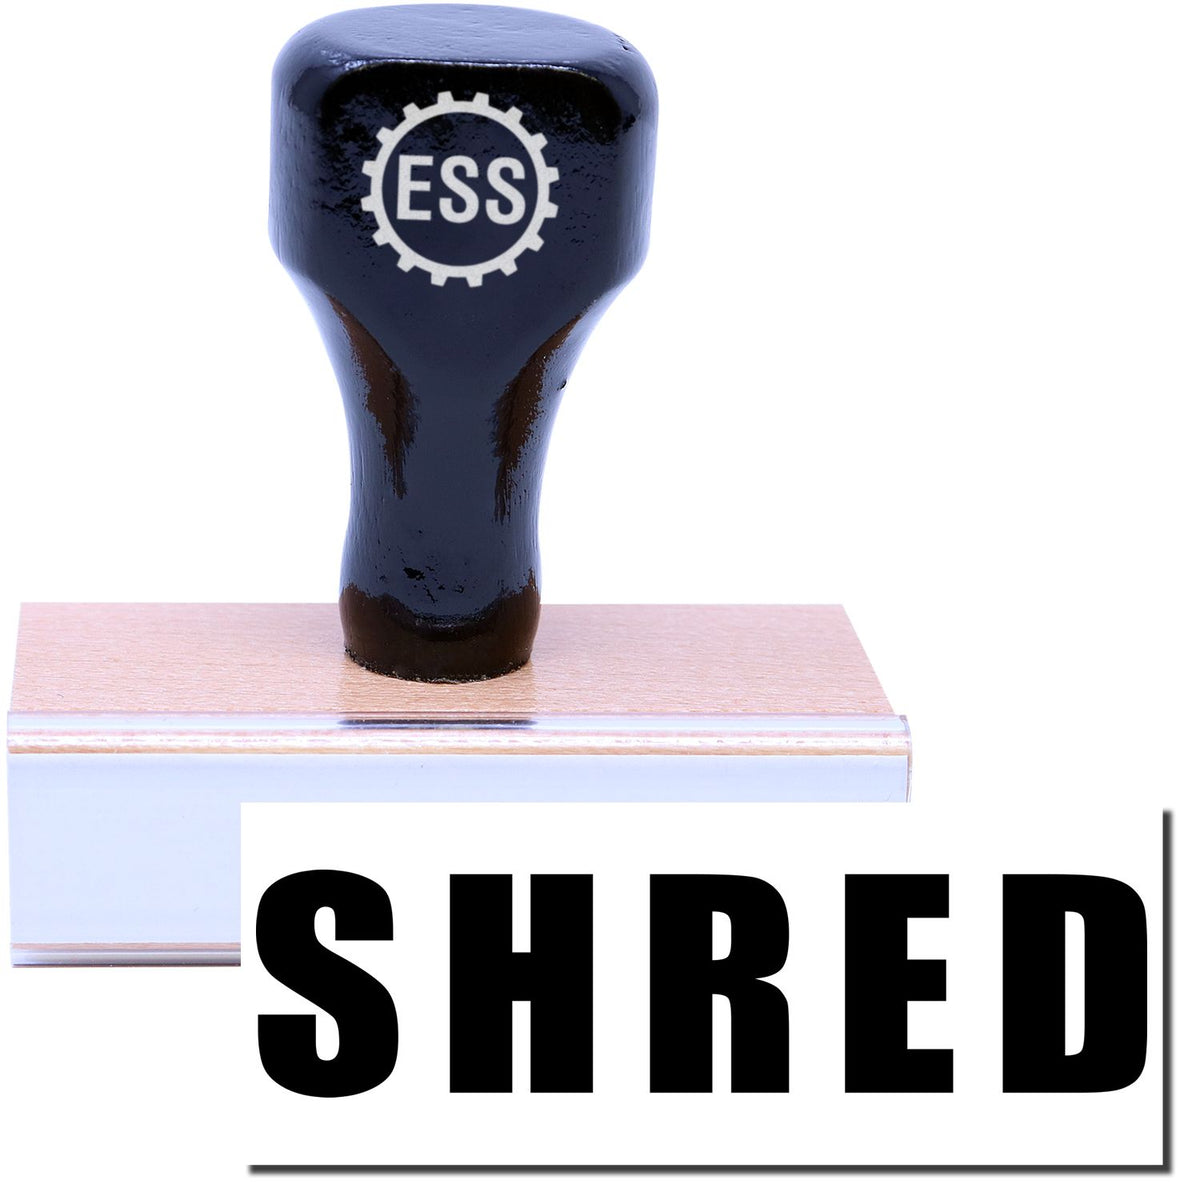 A stock office rubber stamp with a stamped image showing how the text &quot;SHRED&quot; in a large bold font is displayed after stamping.